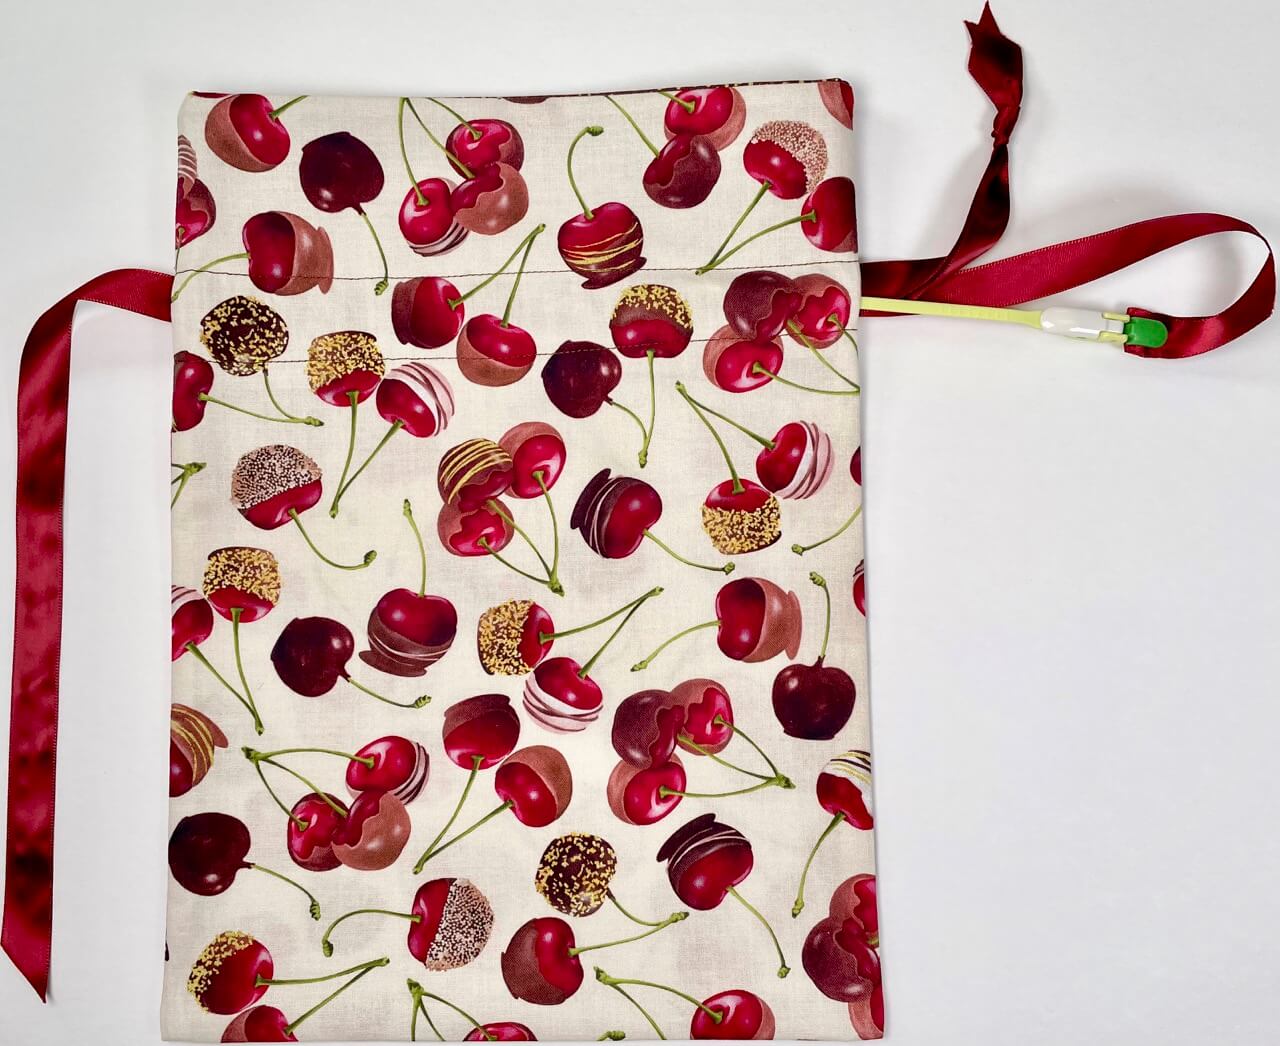 NEW! Sew-In-A-Cinch Gift Bags Sewing Tutorial and NEW! Chocolicious Fabric SALE ending Tonight at ShopNZP.com